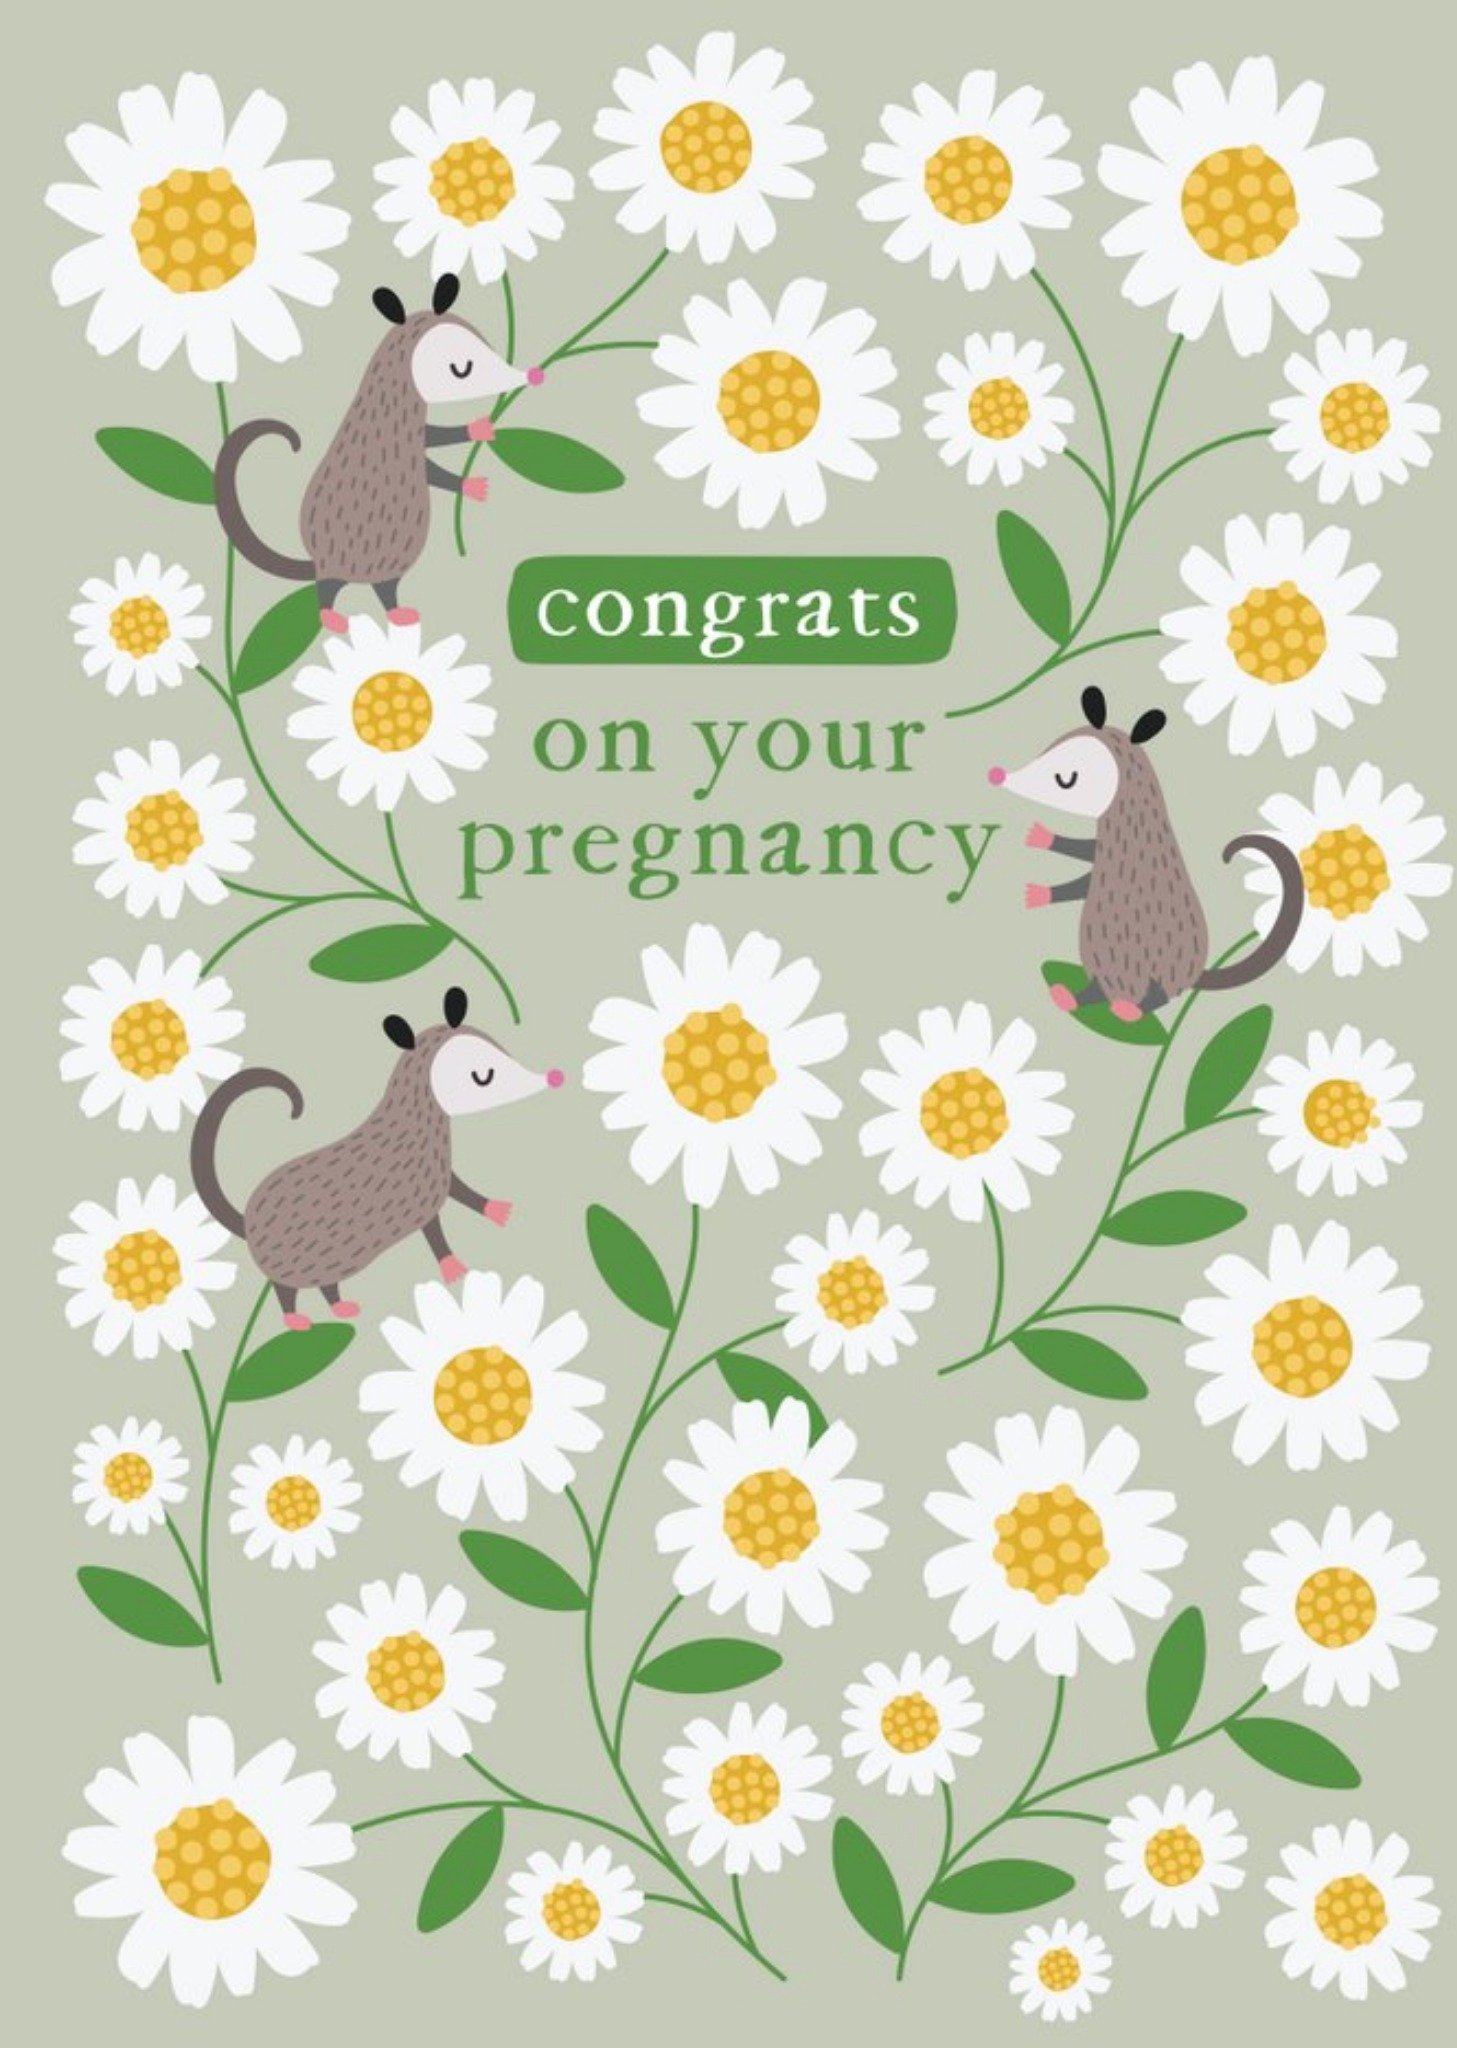 Moonpig Cute Illustrated Floral Possum Congrats On Your Pregnancy Card, Large